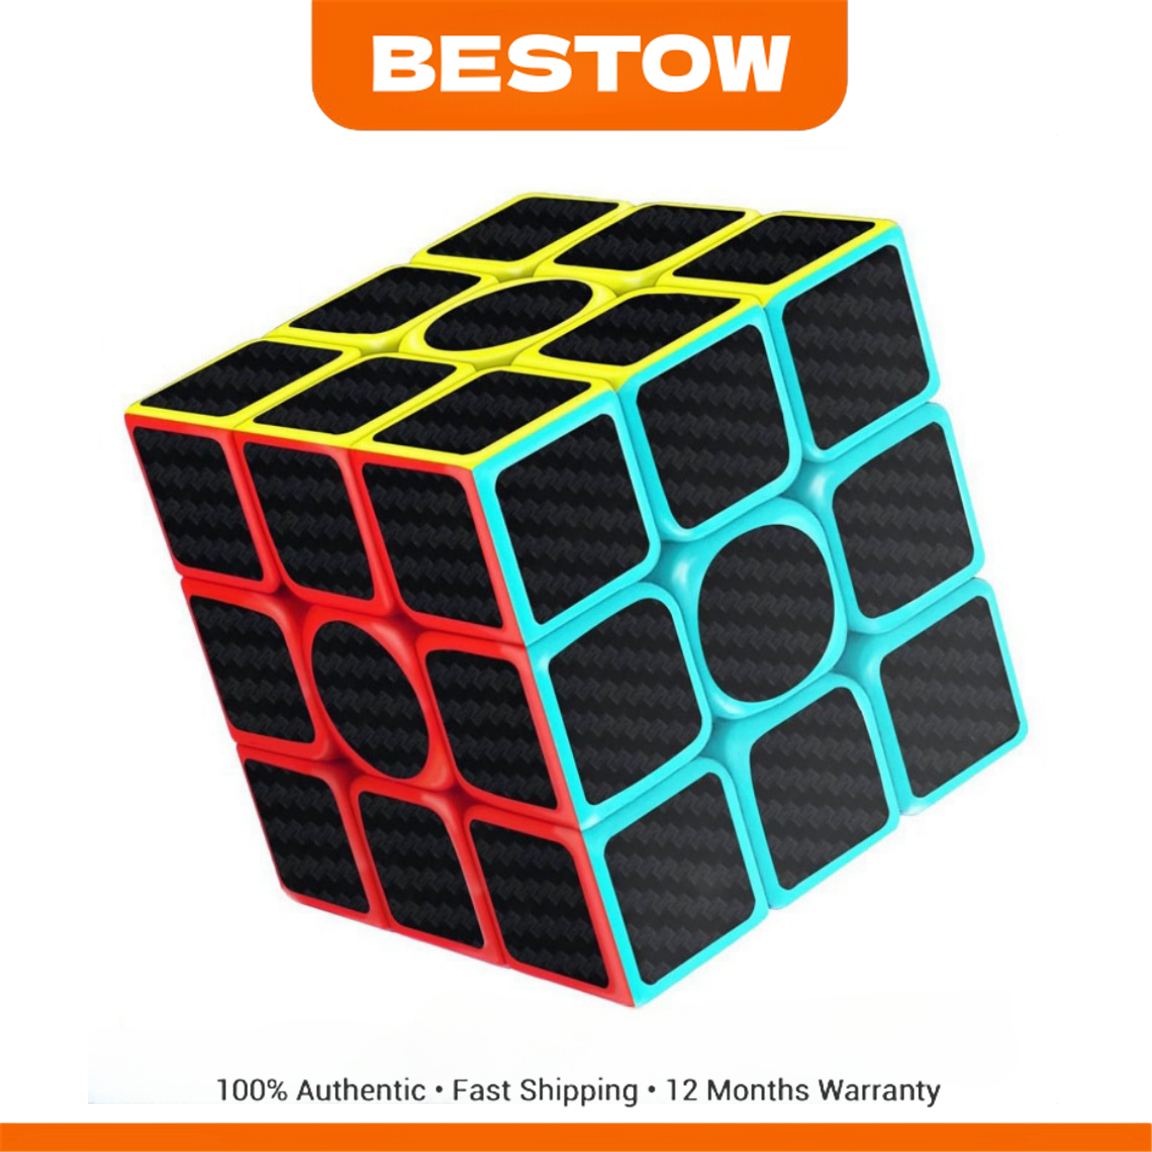 3x3x3 Speed Cube,Stickerless Magic Cube, Smooth Turning Puzzle Box with  Anti-Sticky Design, The Most Educational Toy to Effectively Improve Your